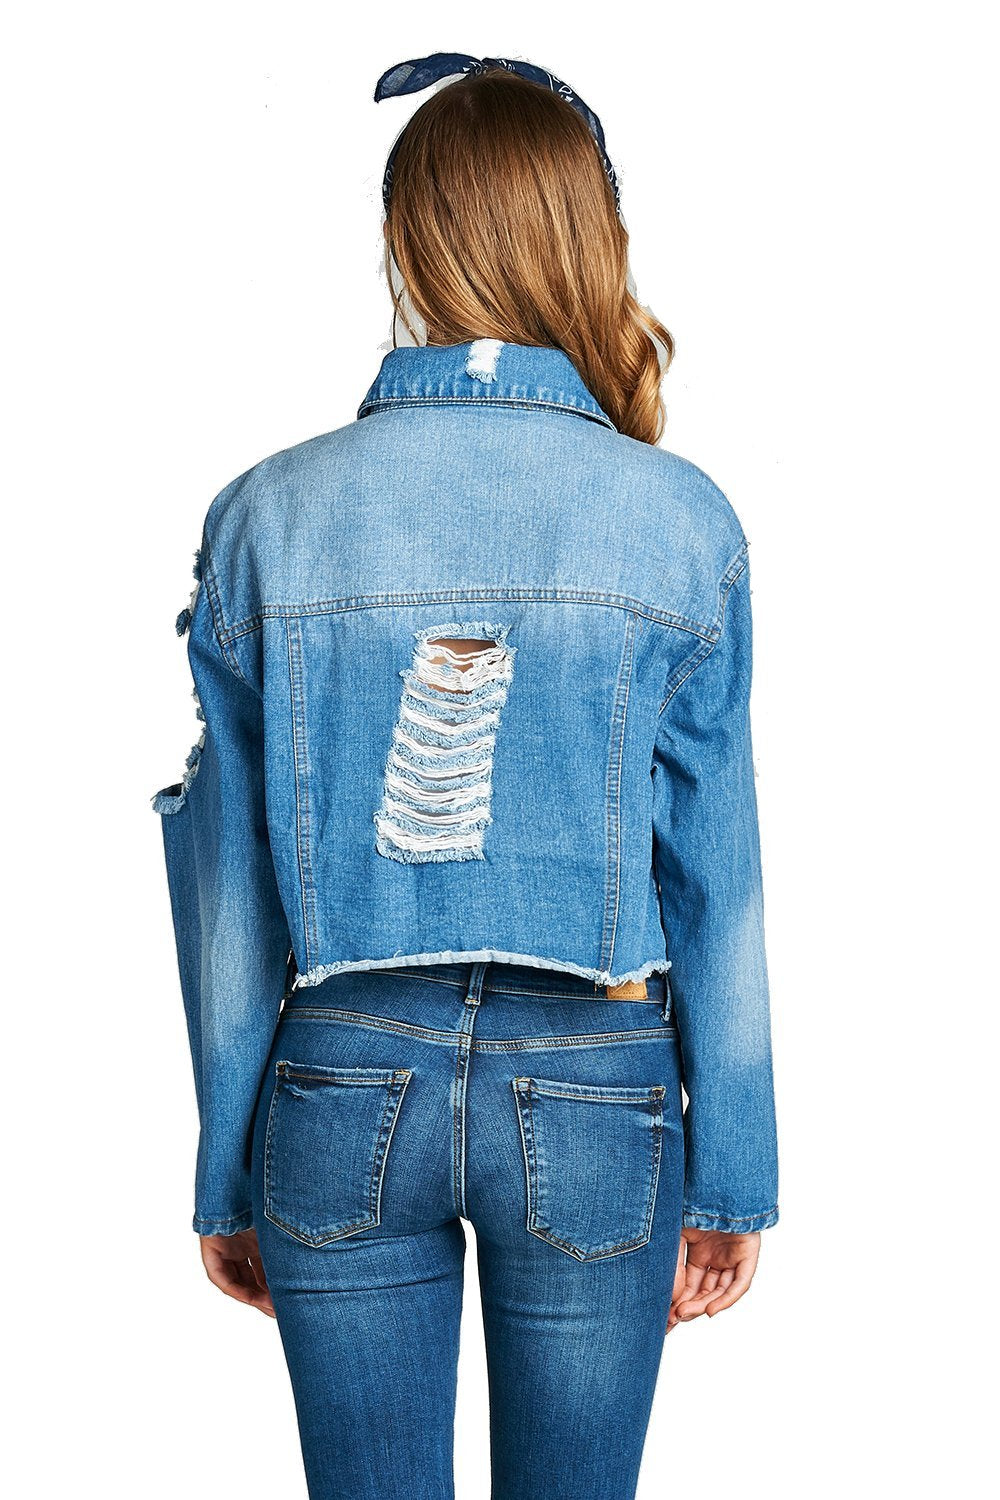 Oversized Cropped Basic Collar Button Front Distressed Ripped Denim Jacket